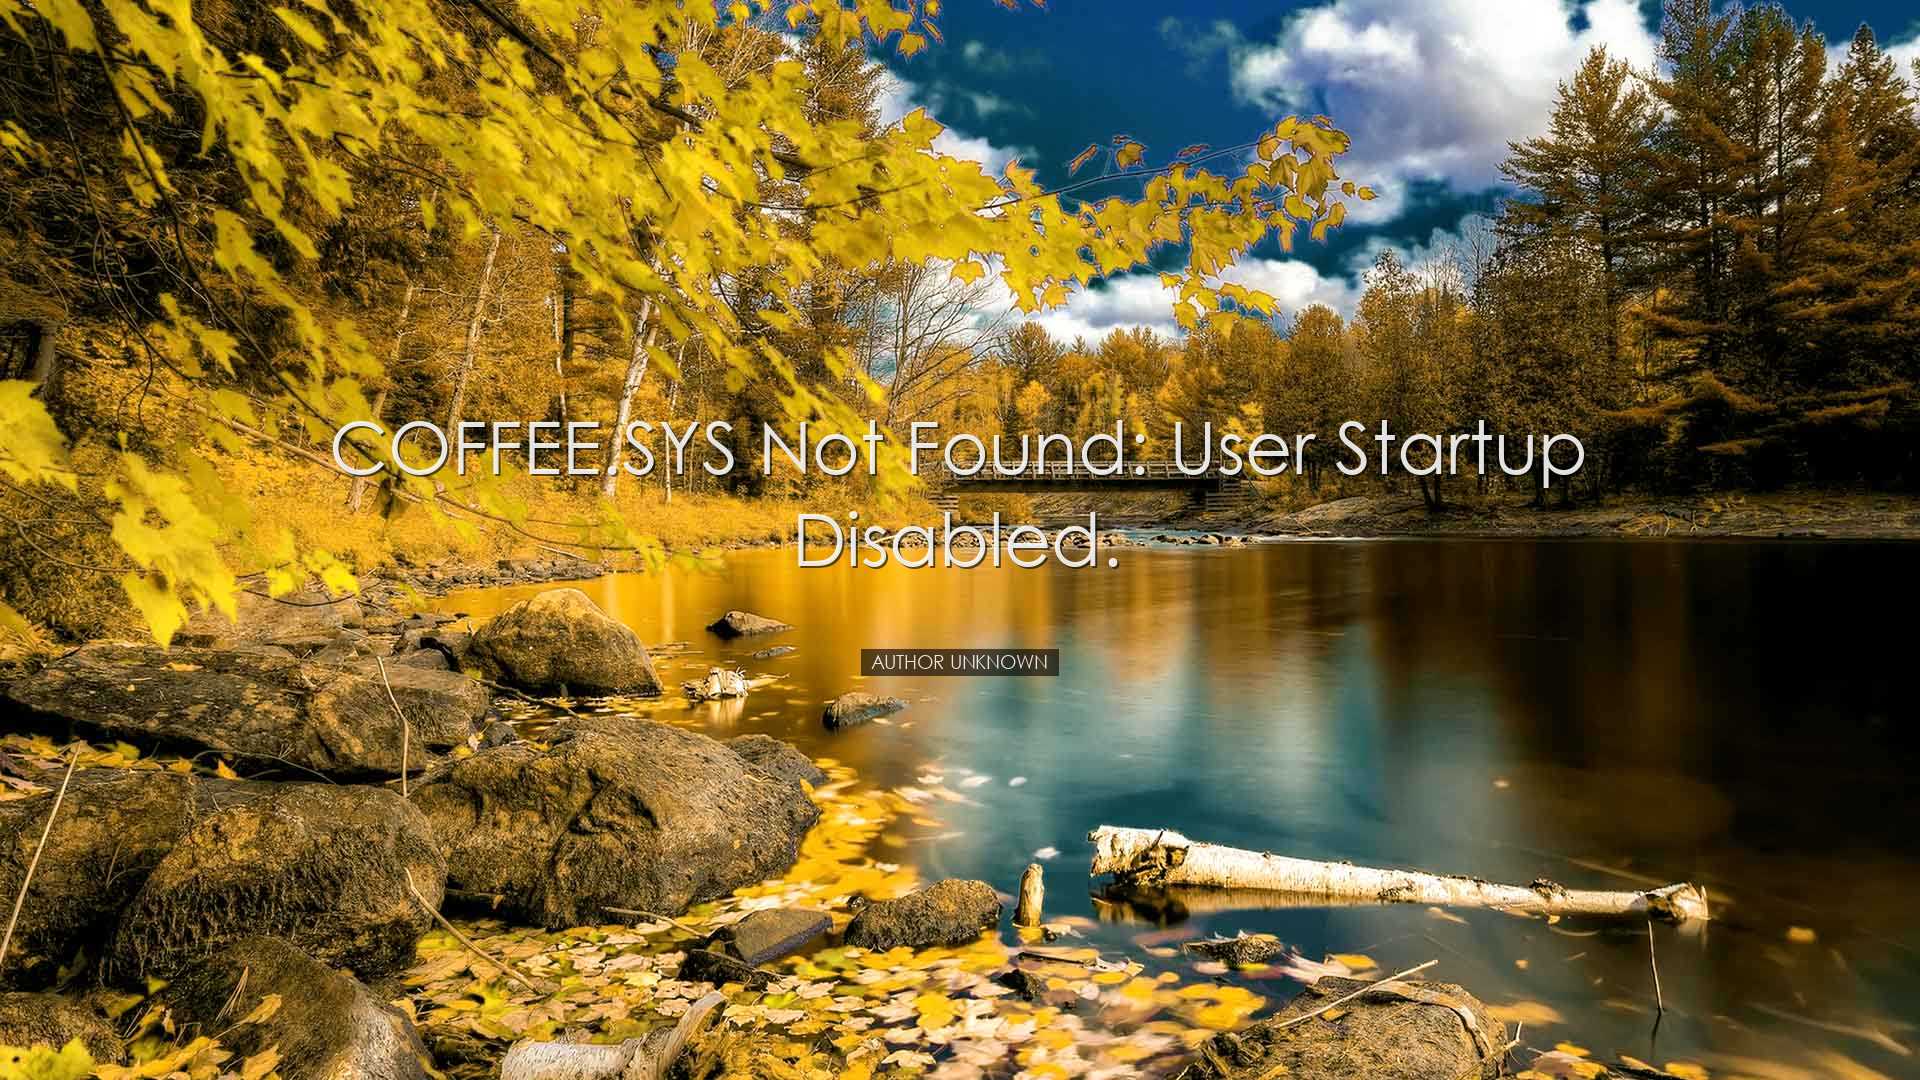 COFFEE.SYS Not Found: User startup disabled. - Author Unknown